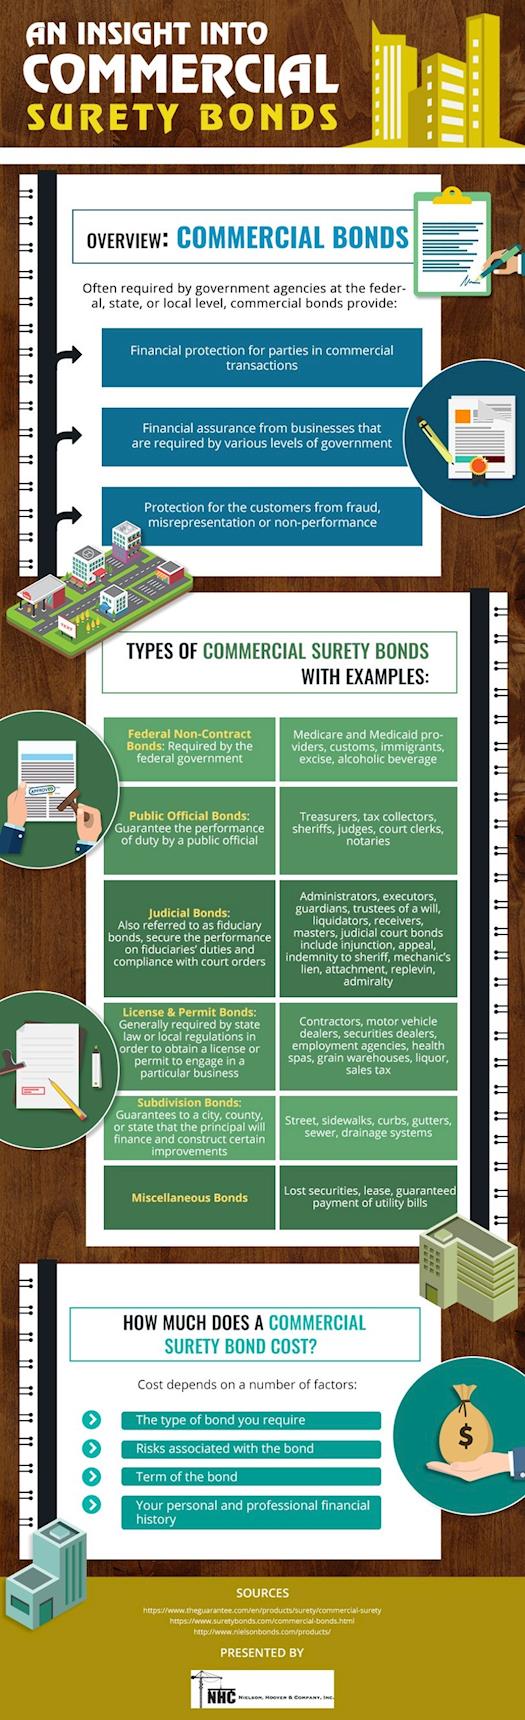 Know the Types of Commercial Surety Bonds